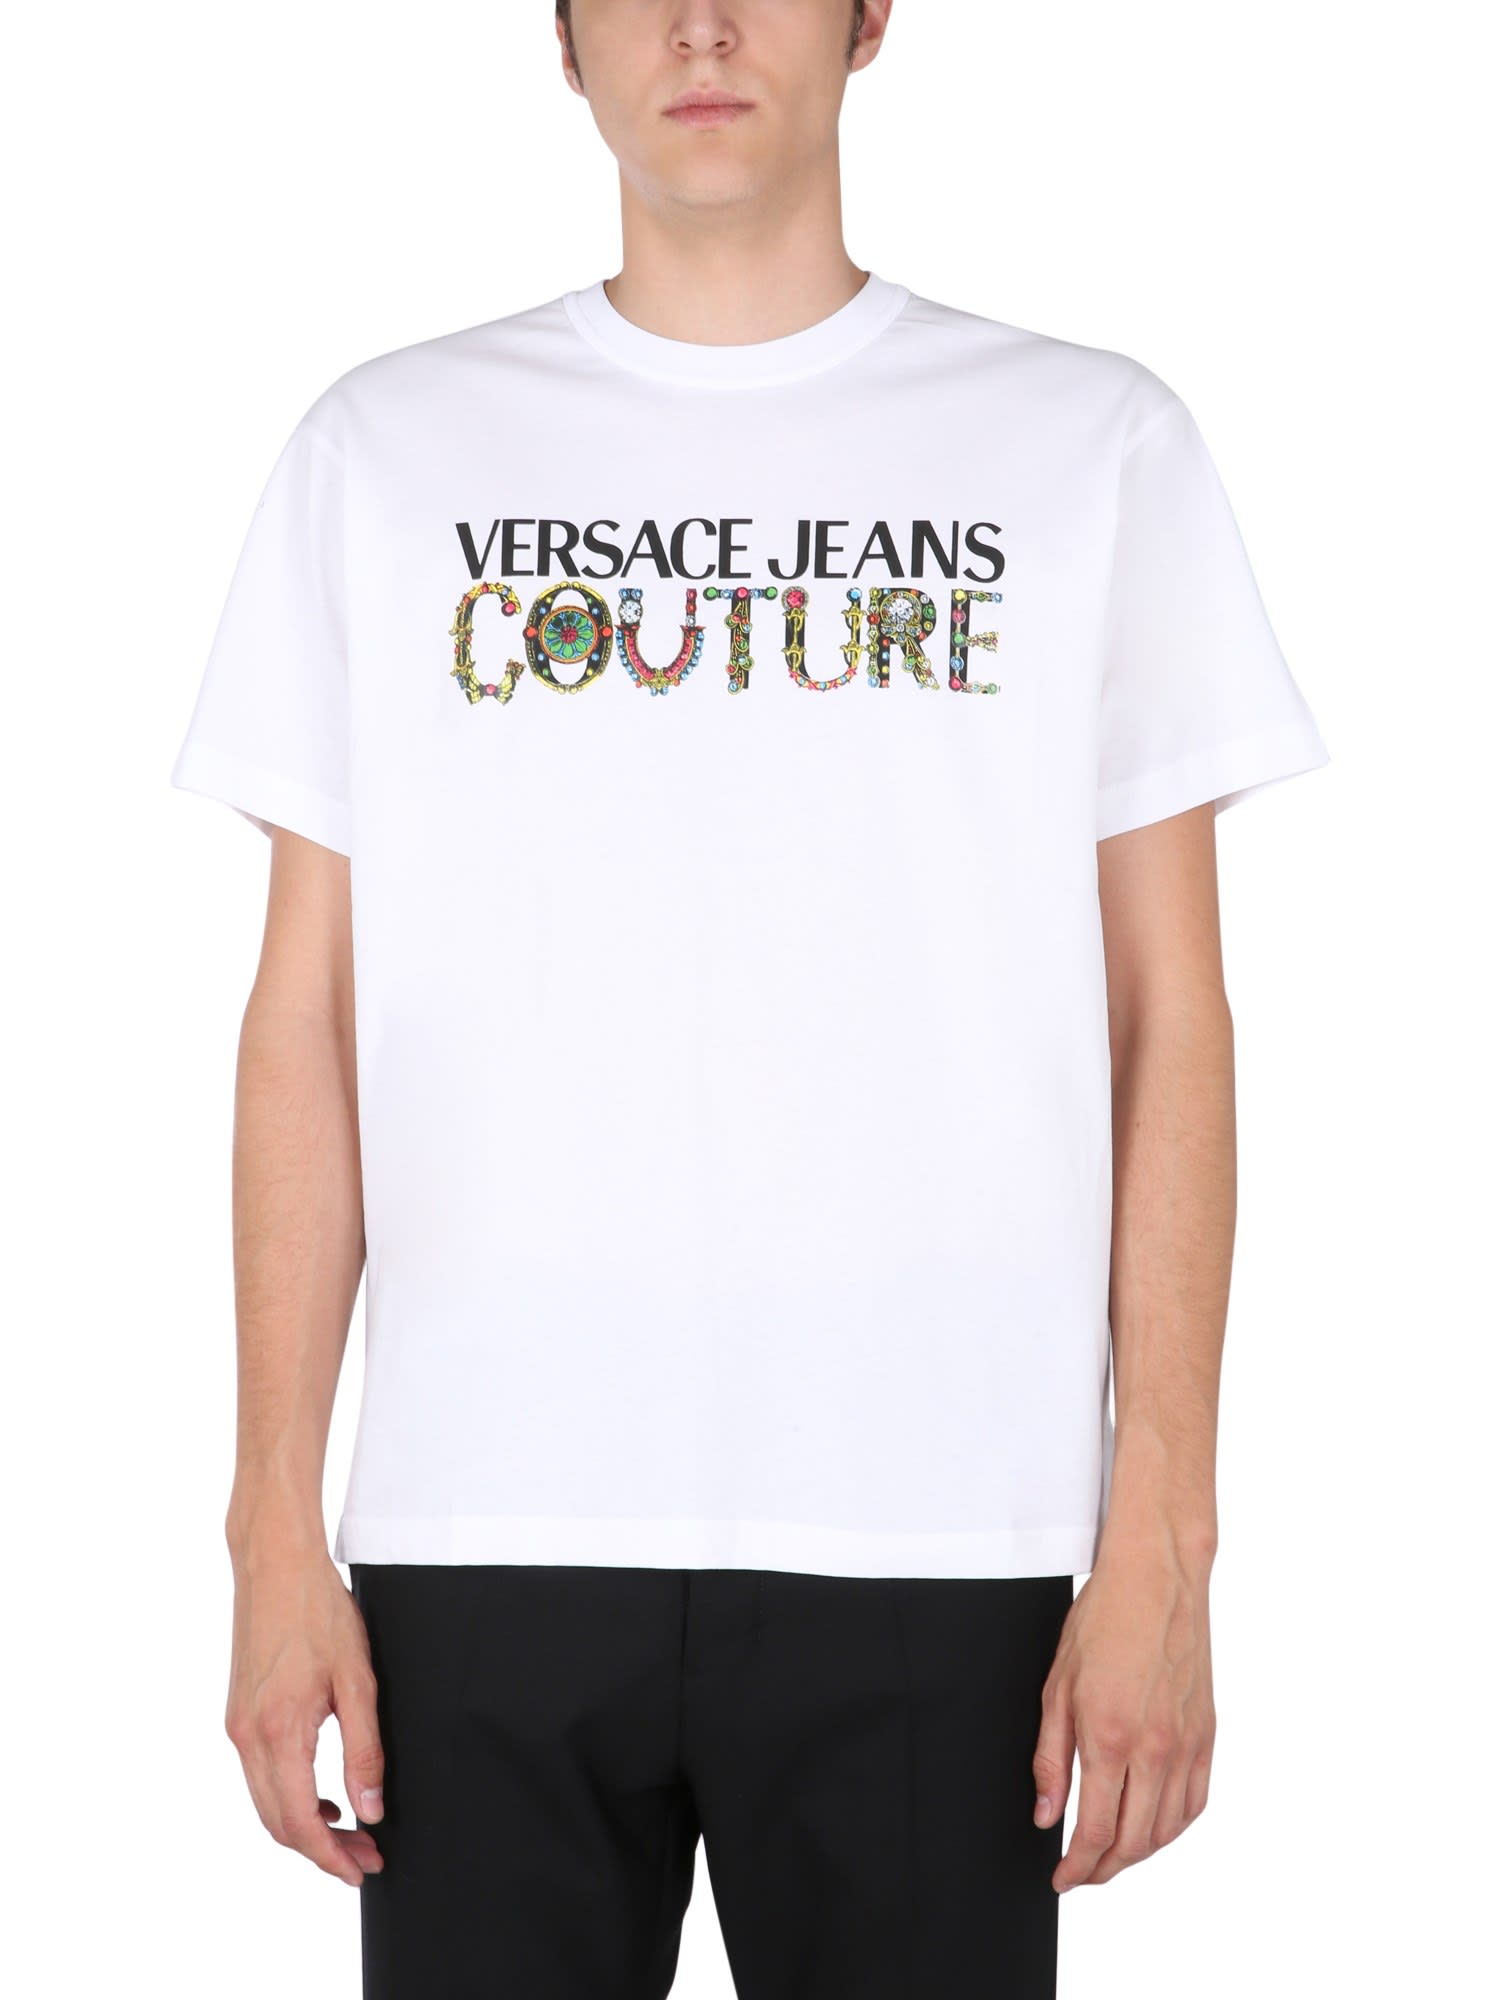 Versace Jeans Couture Round Neck T-shirt With Bijoux Logo